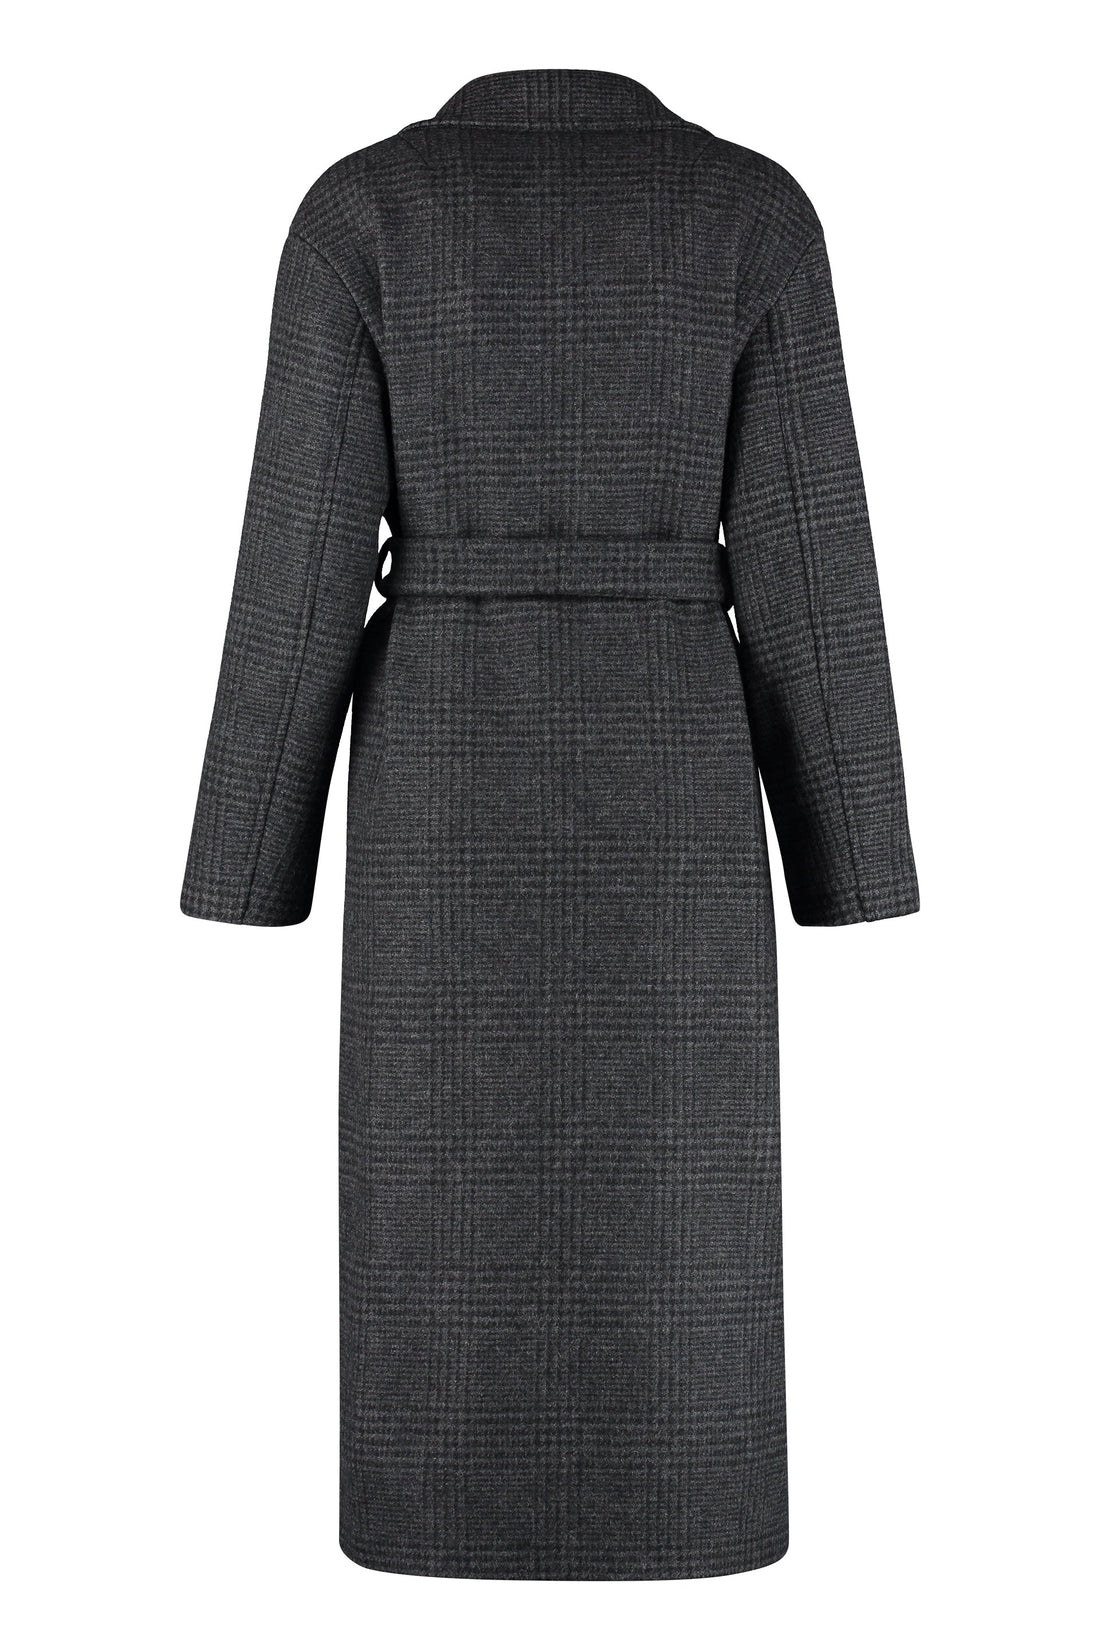 Pinko-OUTLET-SALE-Giacomo double-breasted Prince-of-Wales wool coat-ARCHIVIST